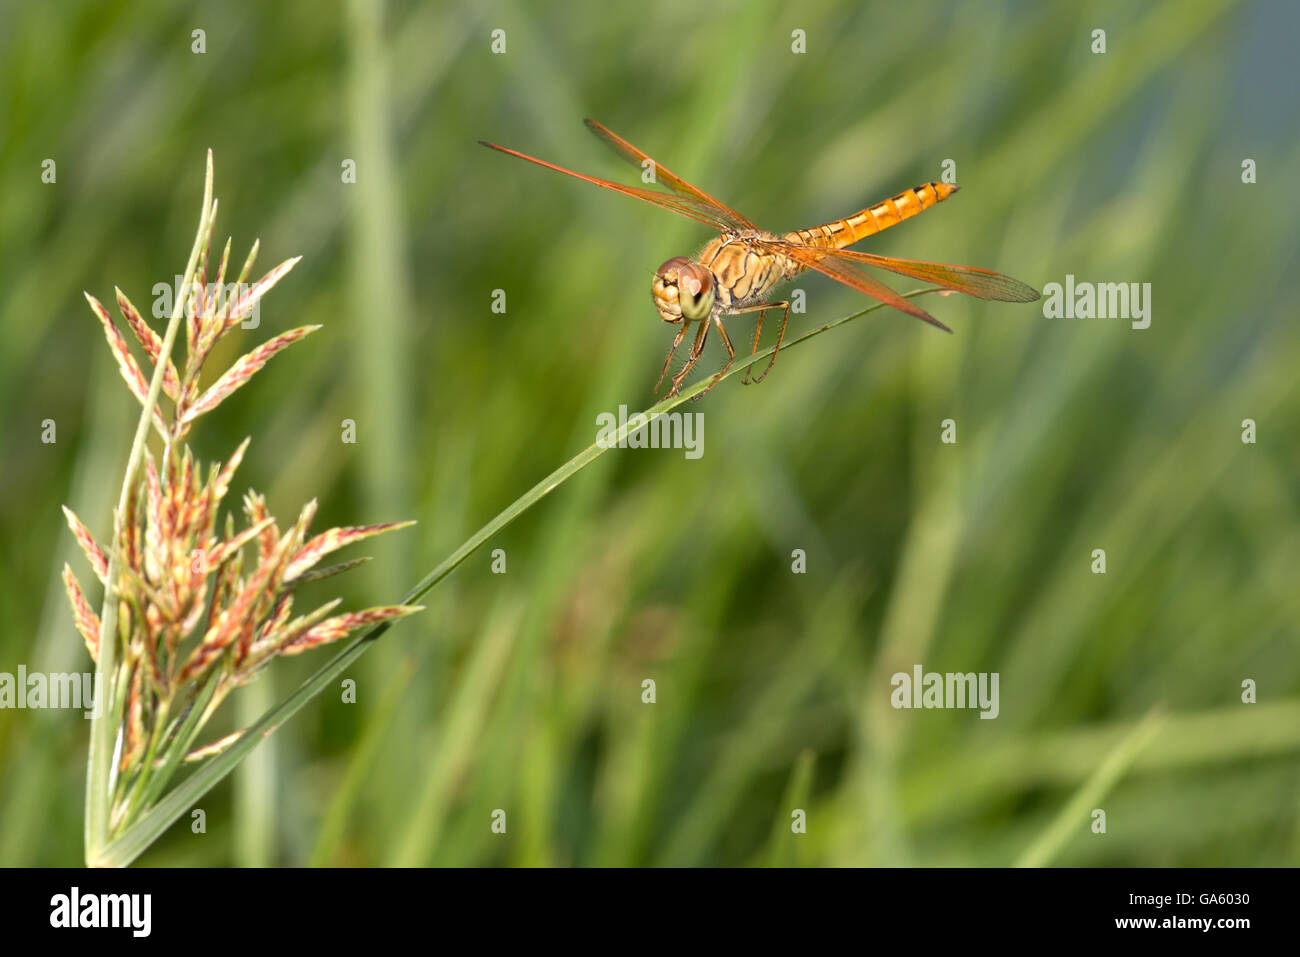 Dragonfly perched on a green grass leaves Stock Photo